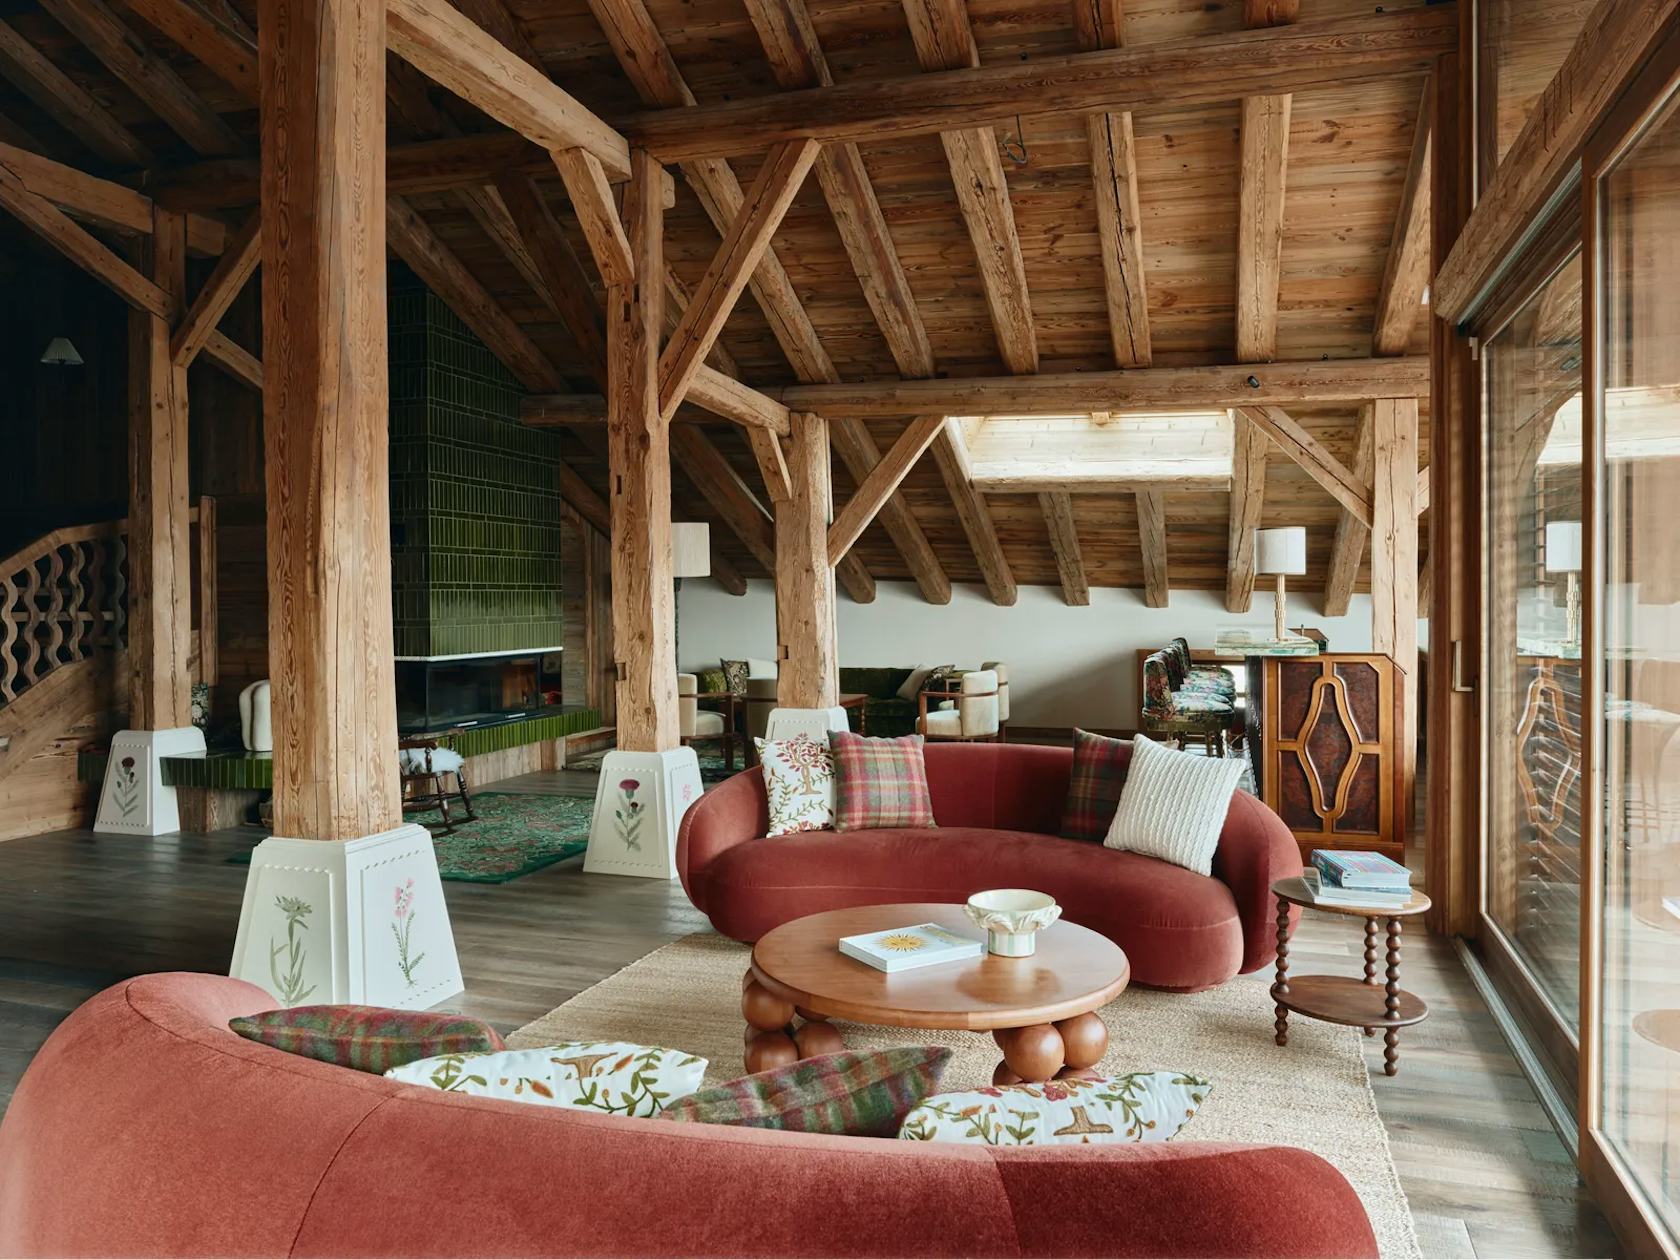  In Megève, an old dwelling reimagined with finesse by the Friedmann & Versace duo